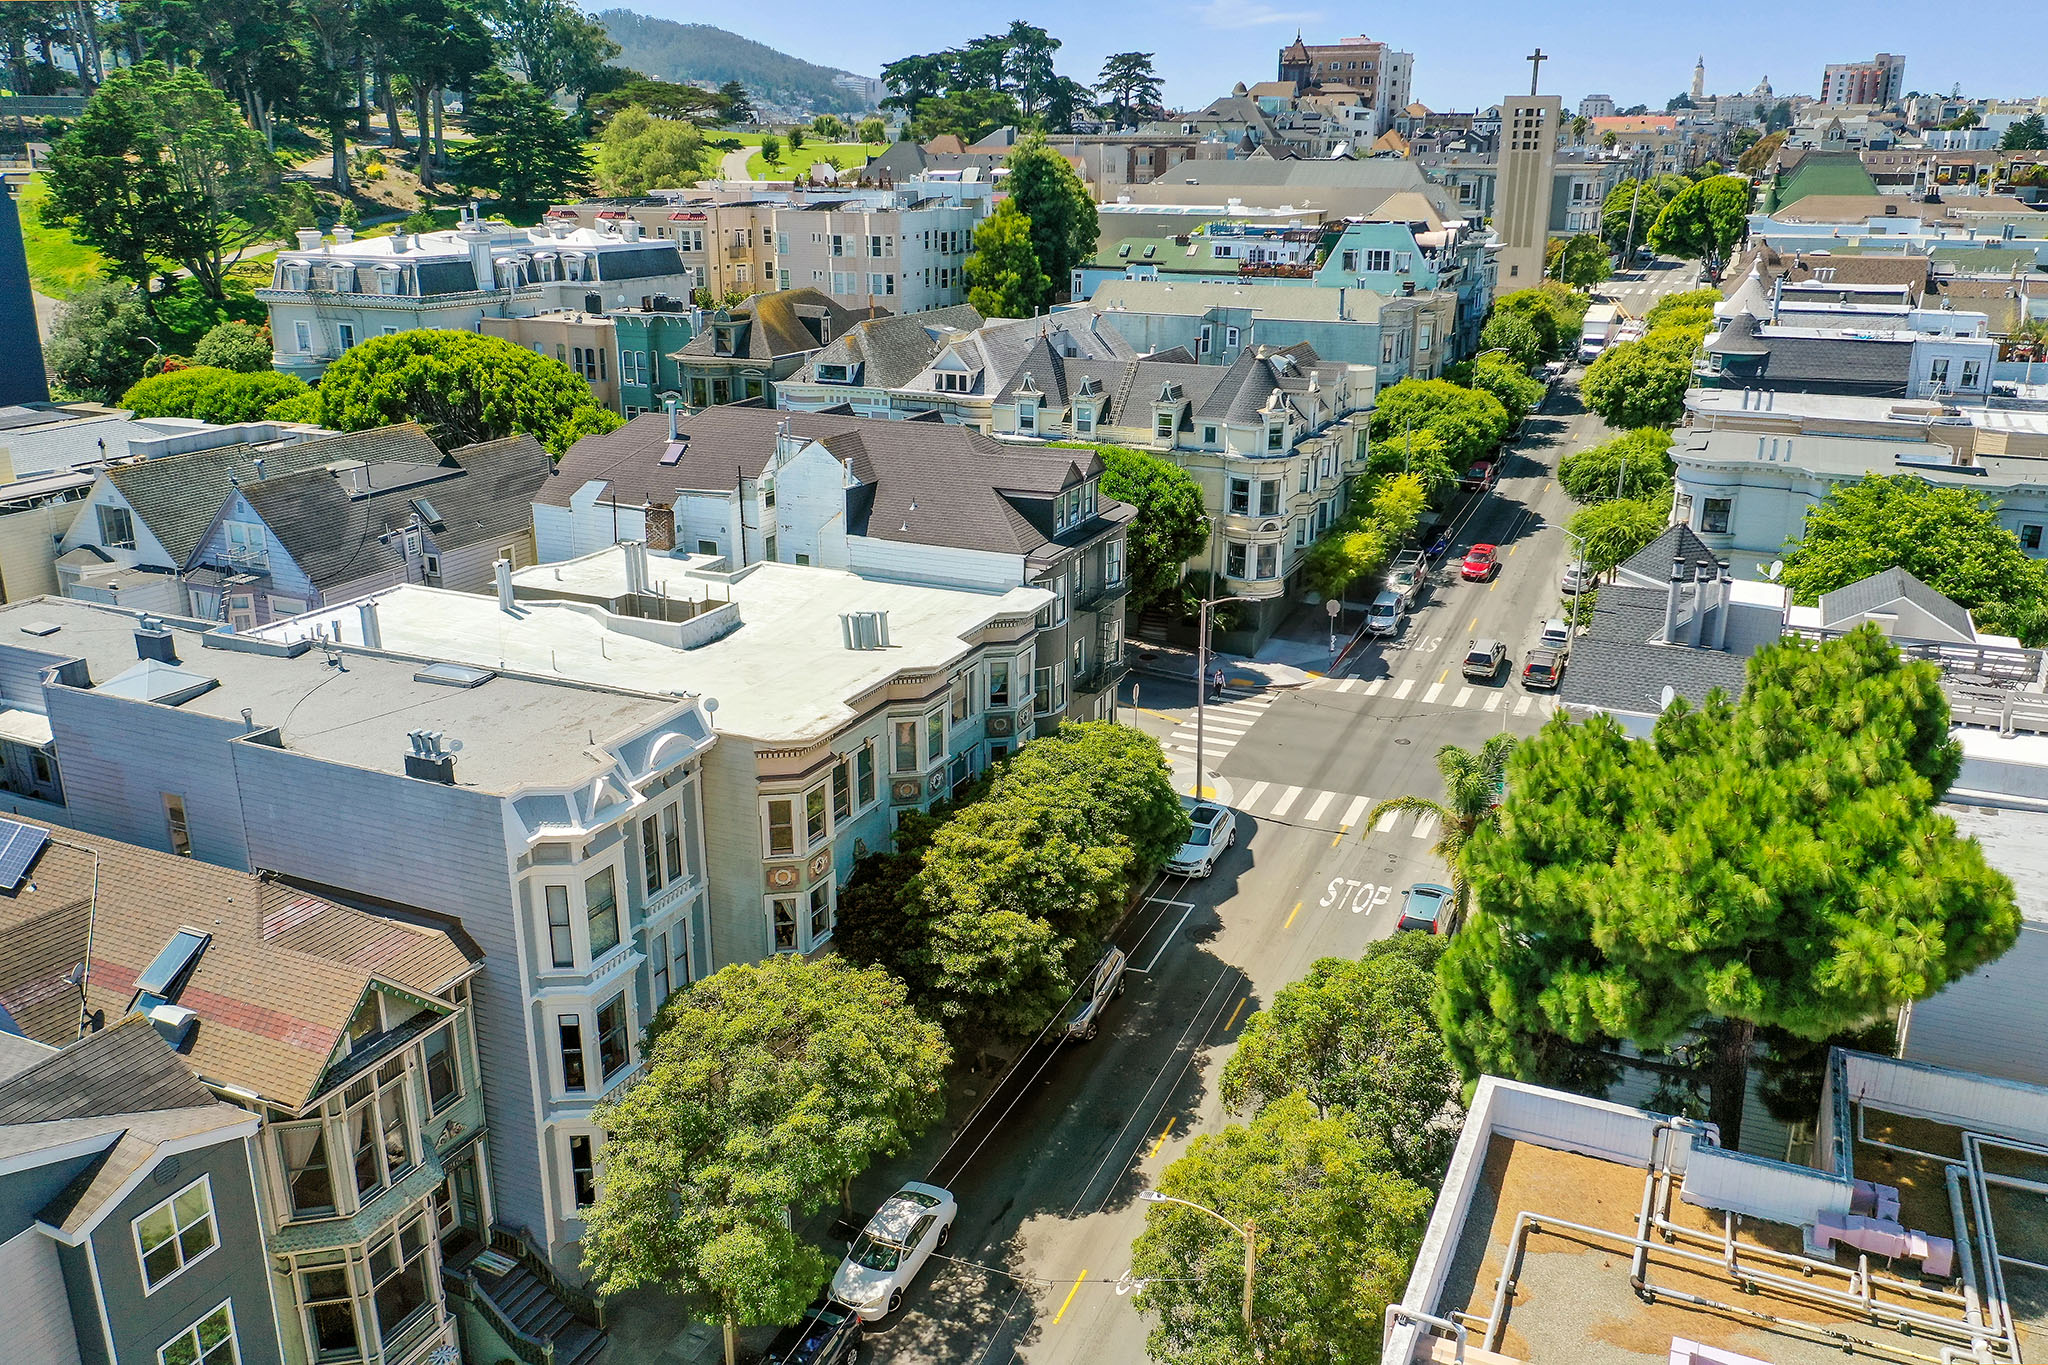 Property Photo: Aerial view of McAllister Street and proximity to the park